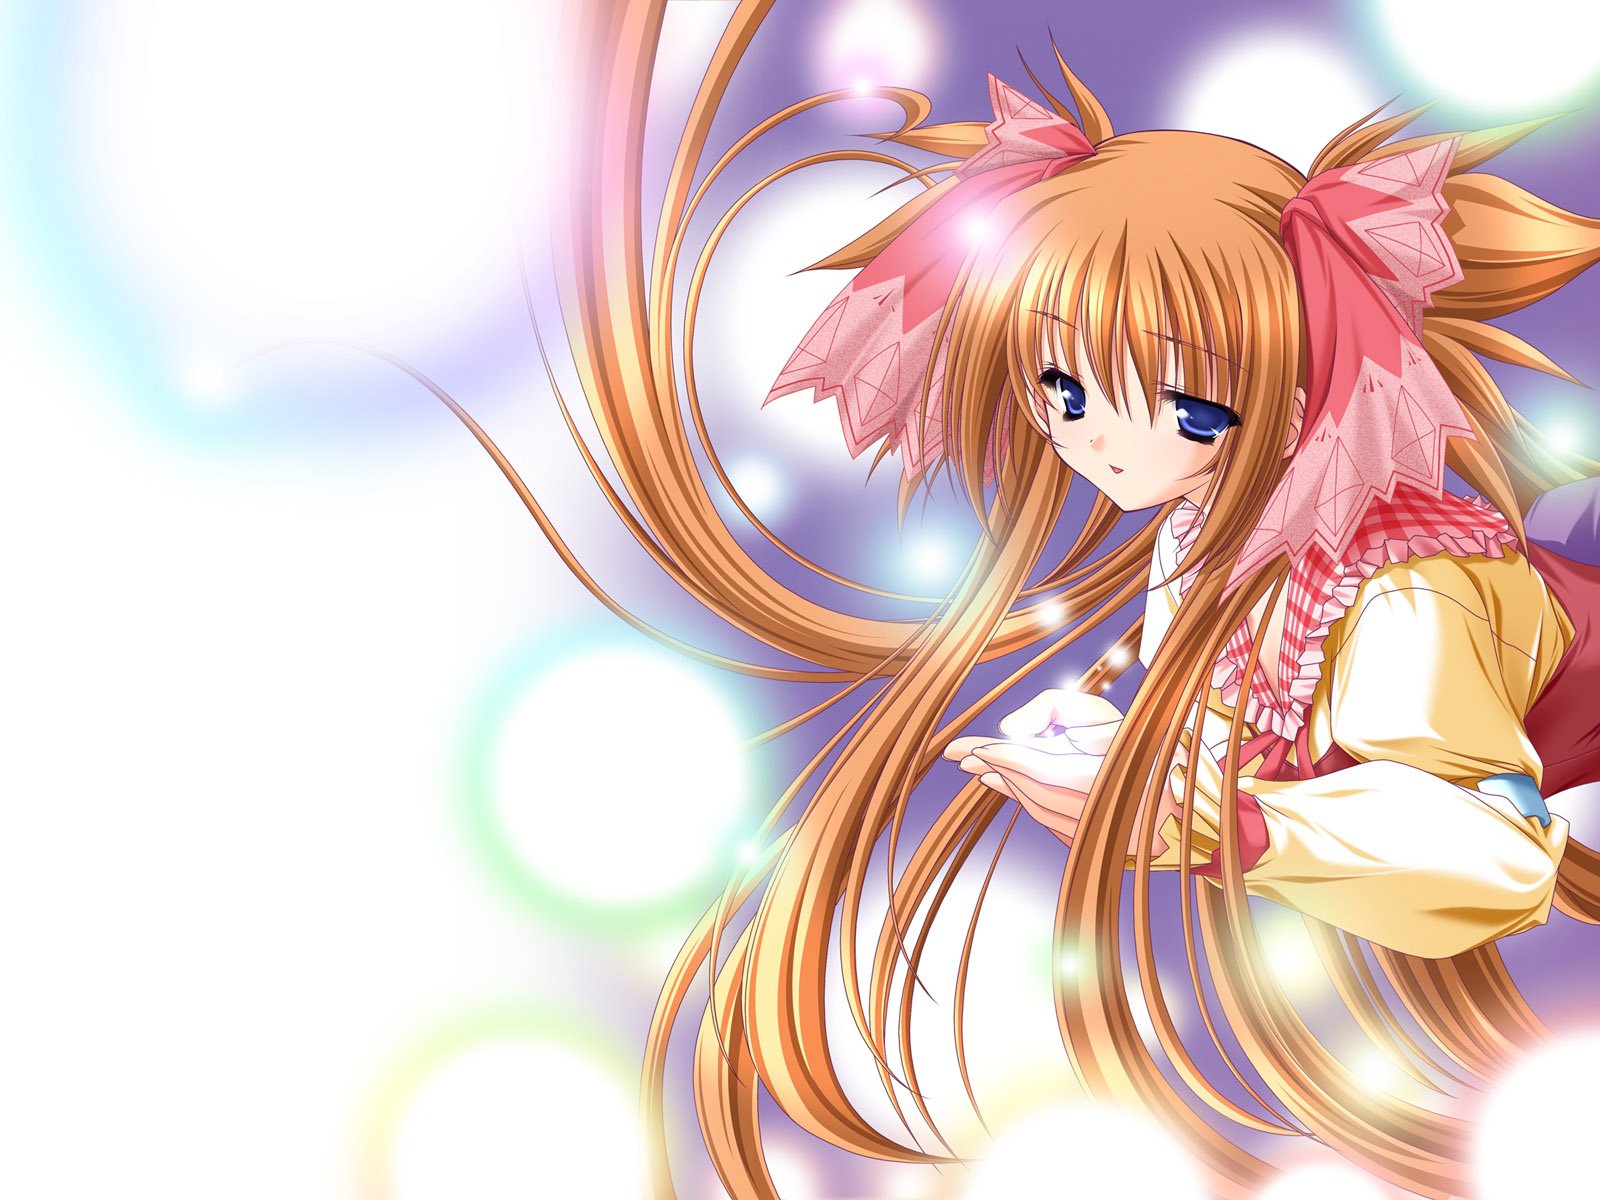 Anime Girls 9 Wallpapers HD Wallpapers 1600x1200